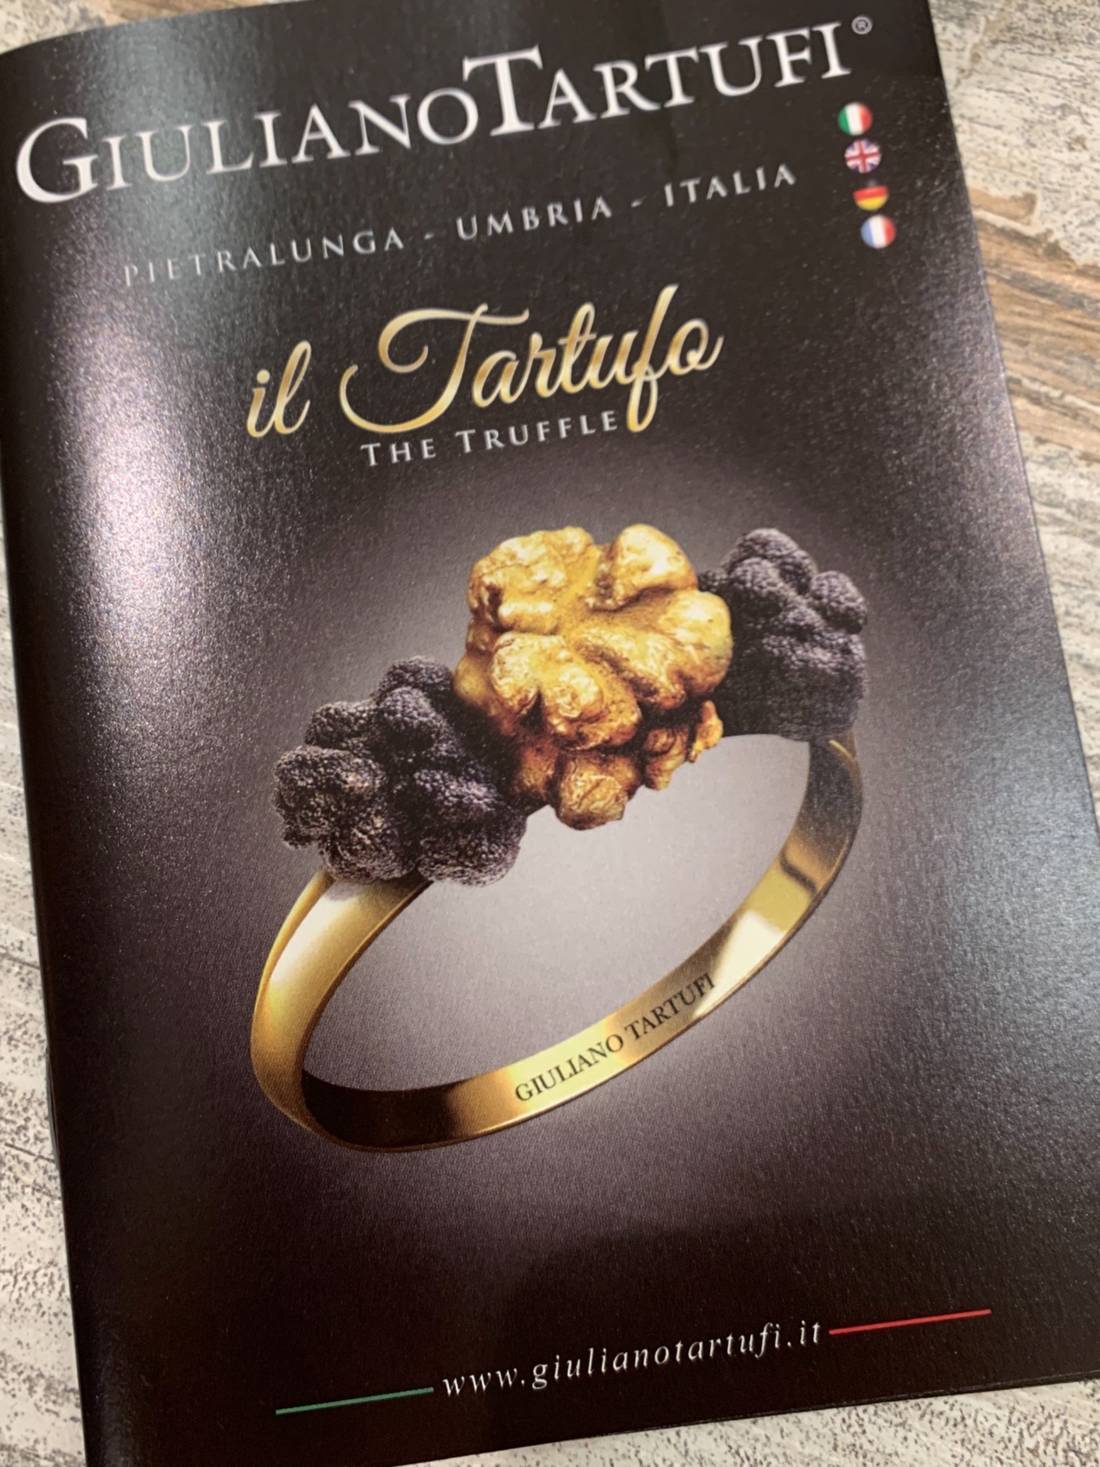 # THE LOGO OF GT IS A TRUFFLE-RING